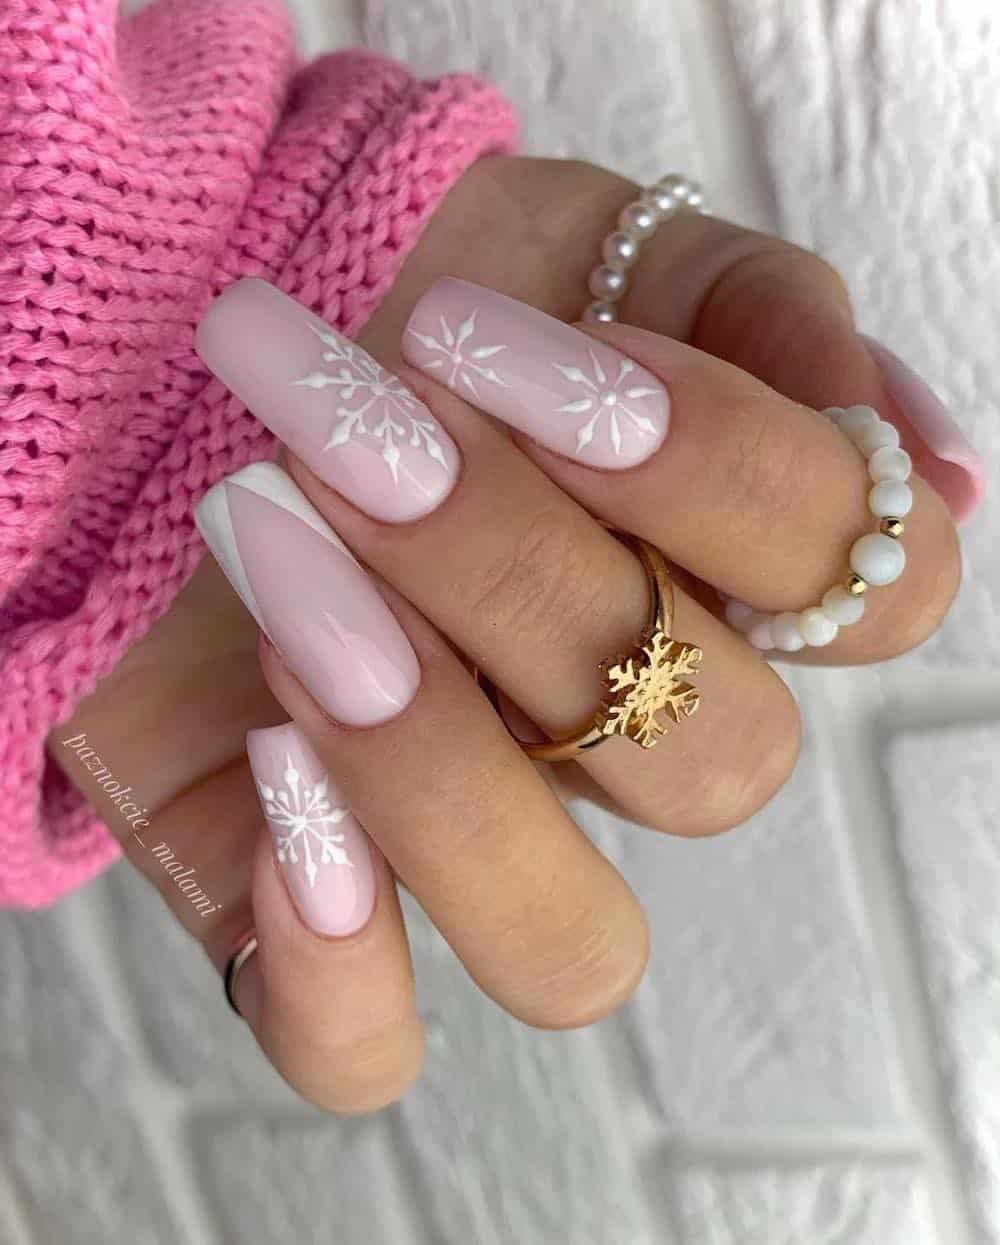 A hand with long square nails painted a soft pink with white snowflakes and a slanted white French tips accent nail